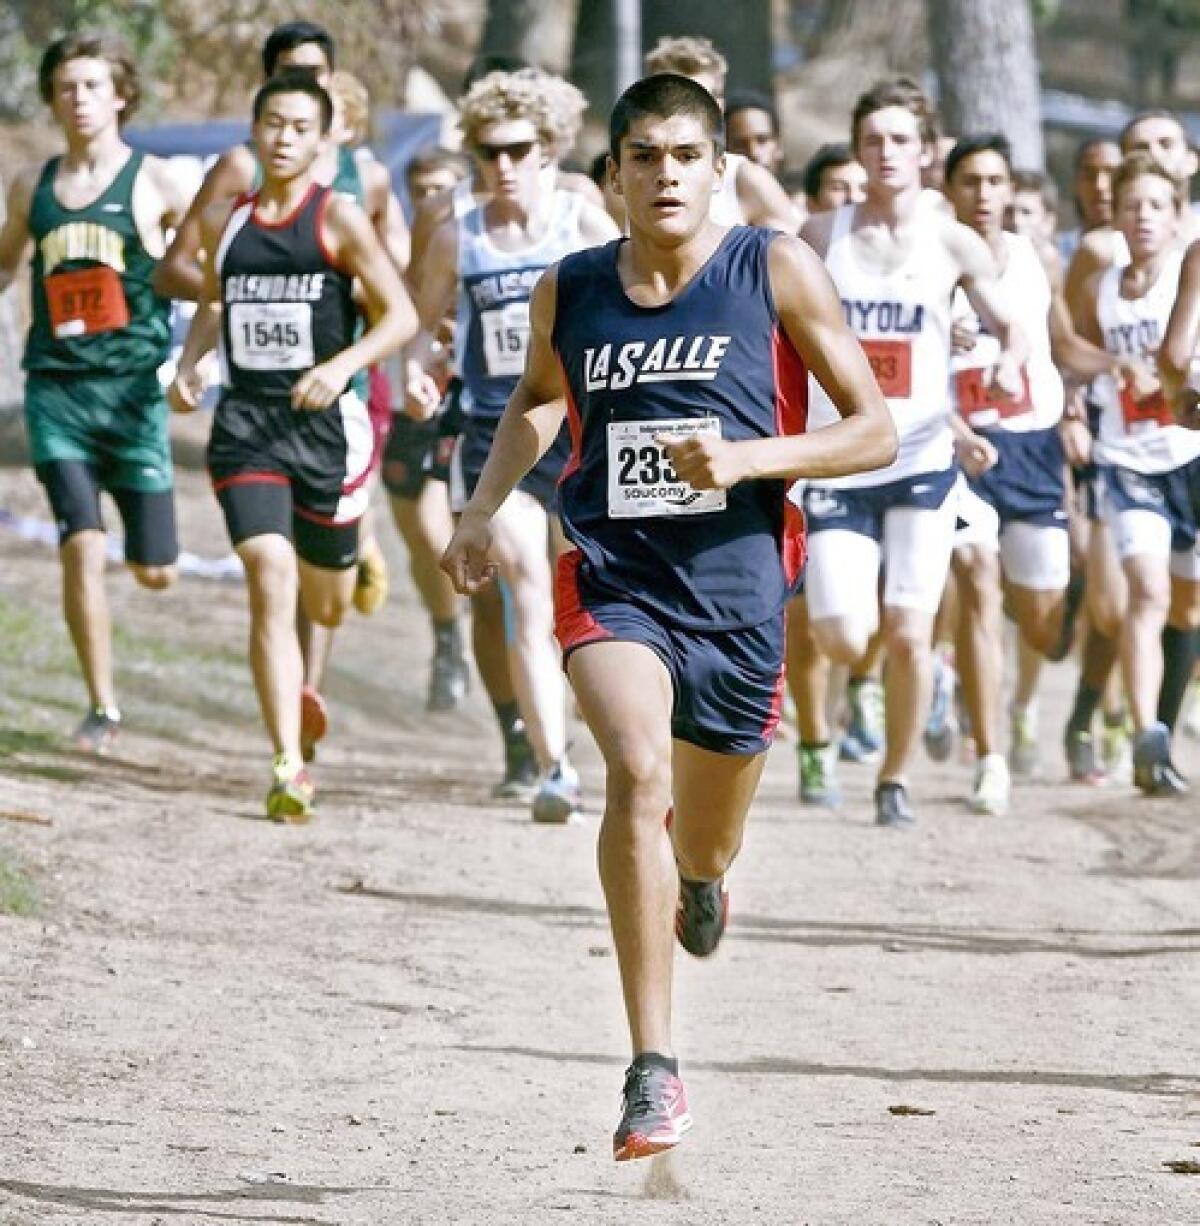 La Salle High cross-country runner Daniel De La Torre demolished his competition at the Bell-Jeff Invitational Saturday.